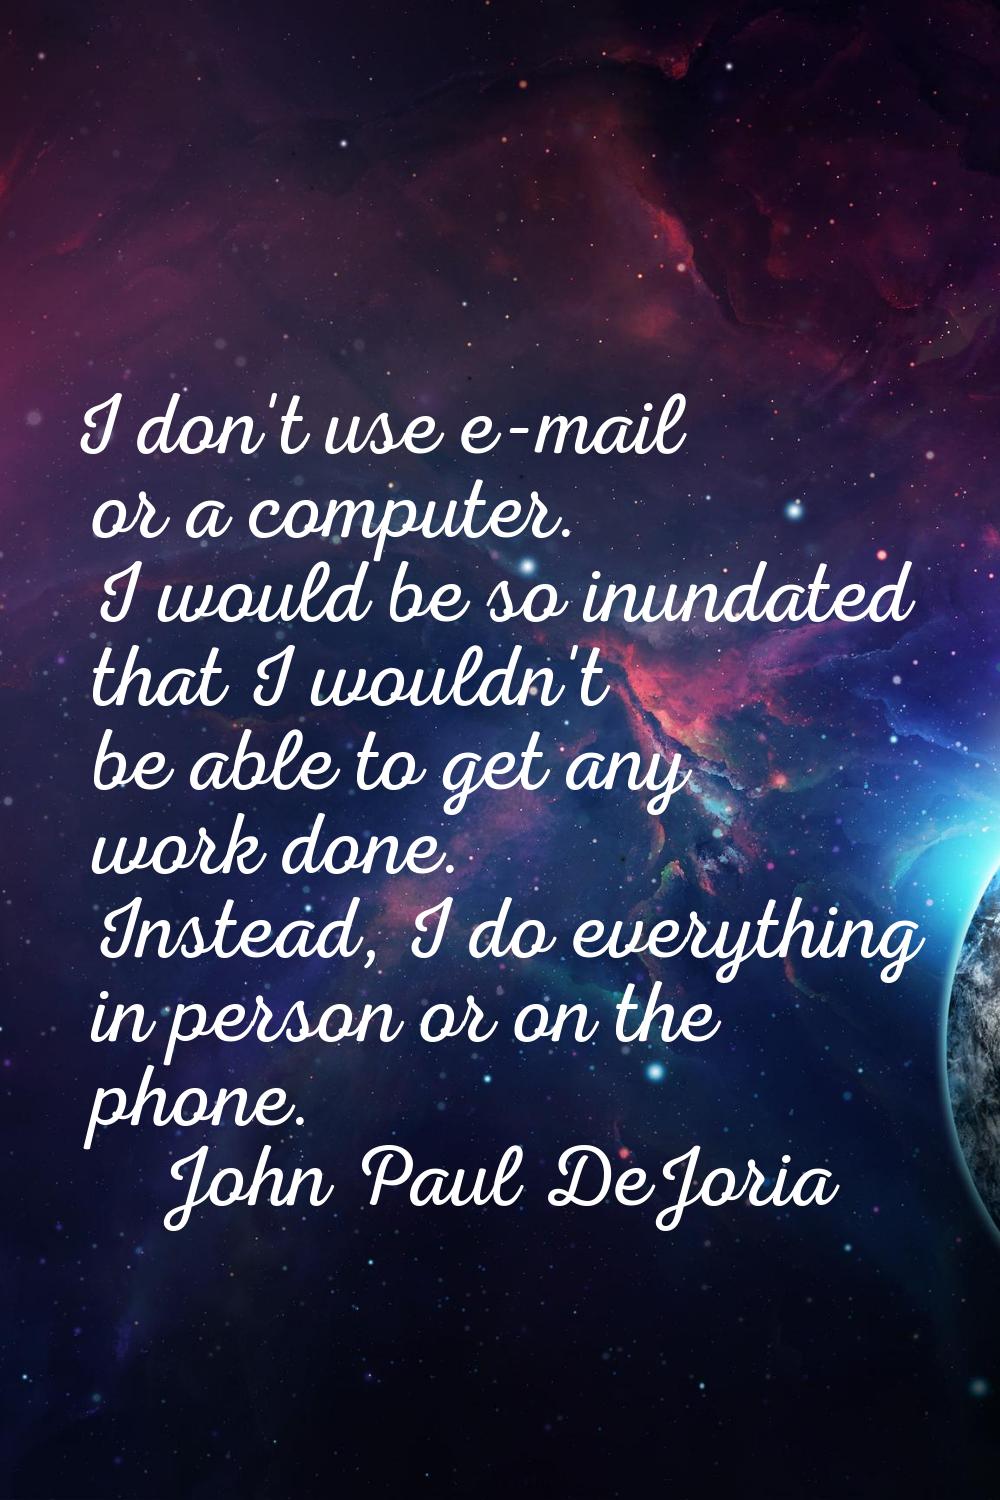 I don't use e-mail or a computer. I would be so inundated that I wouldn't be able to get any work d